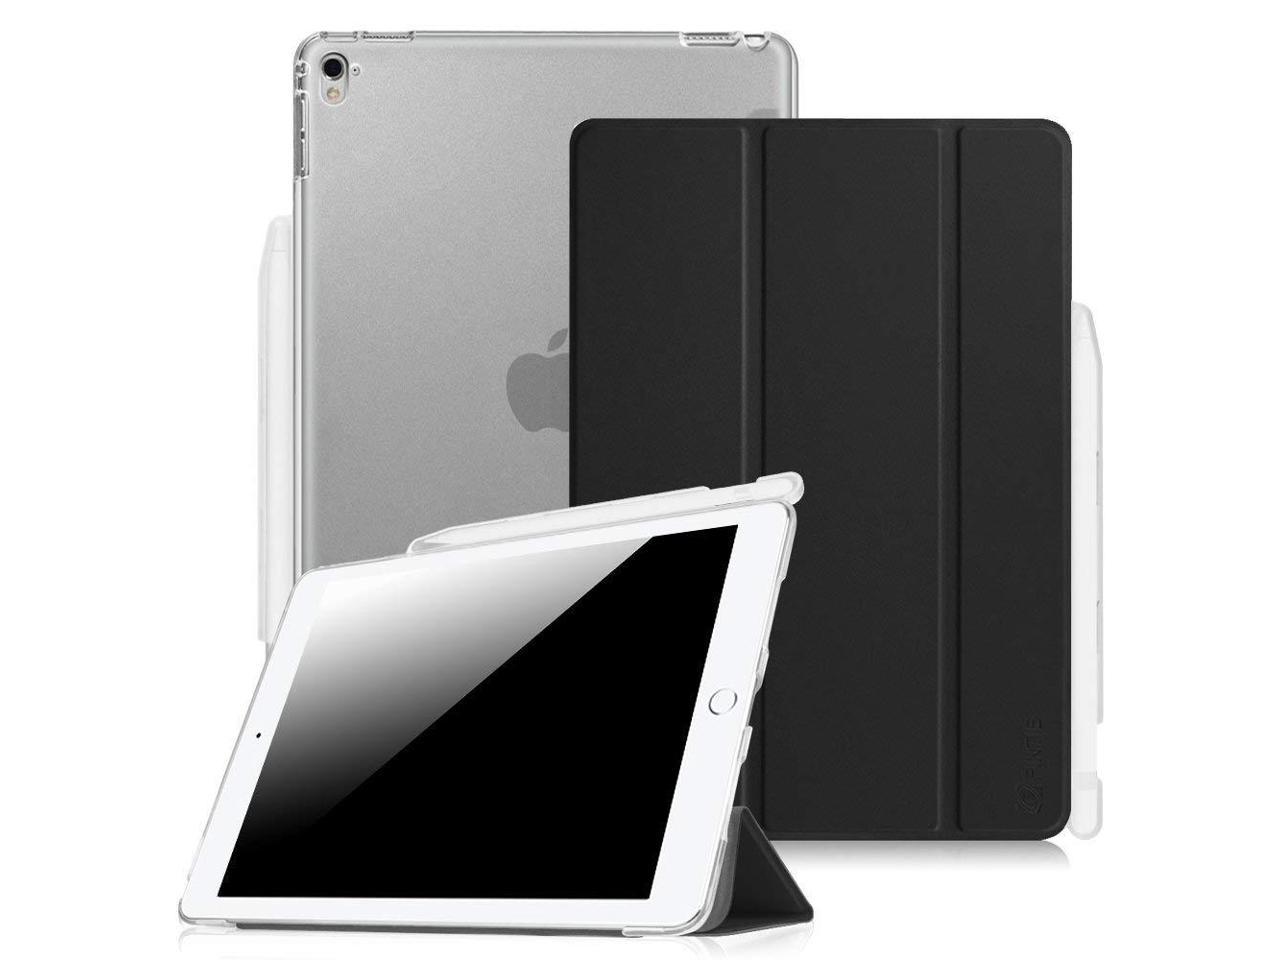 Fintie Ipad Pro 9 7 Case With Built In Apple Pencil Holder Slim Shell Standing Cover With Translucent Frosted Back Protector Auto Wake Sleep For Apple Ipad Pro 9 7 Inch Tablet Black Newegg Com